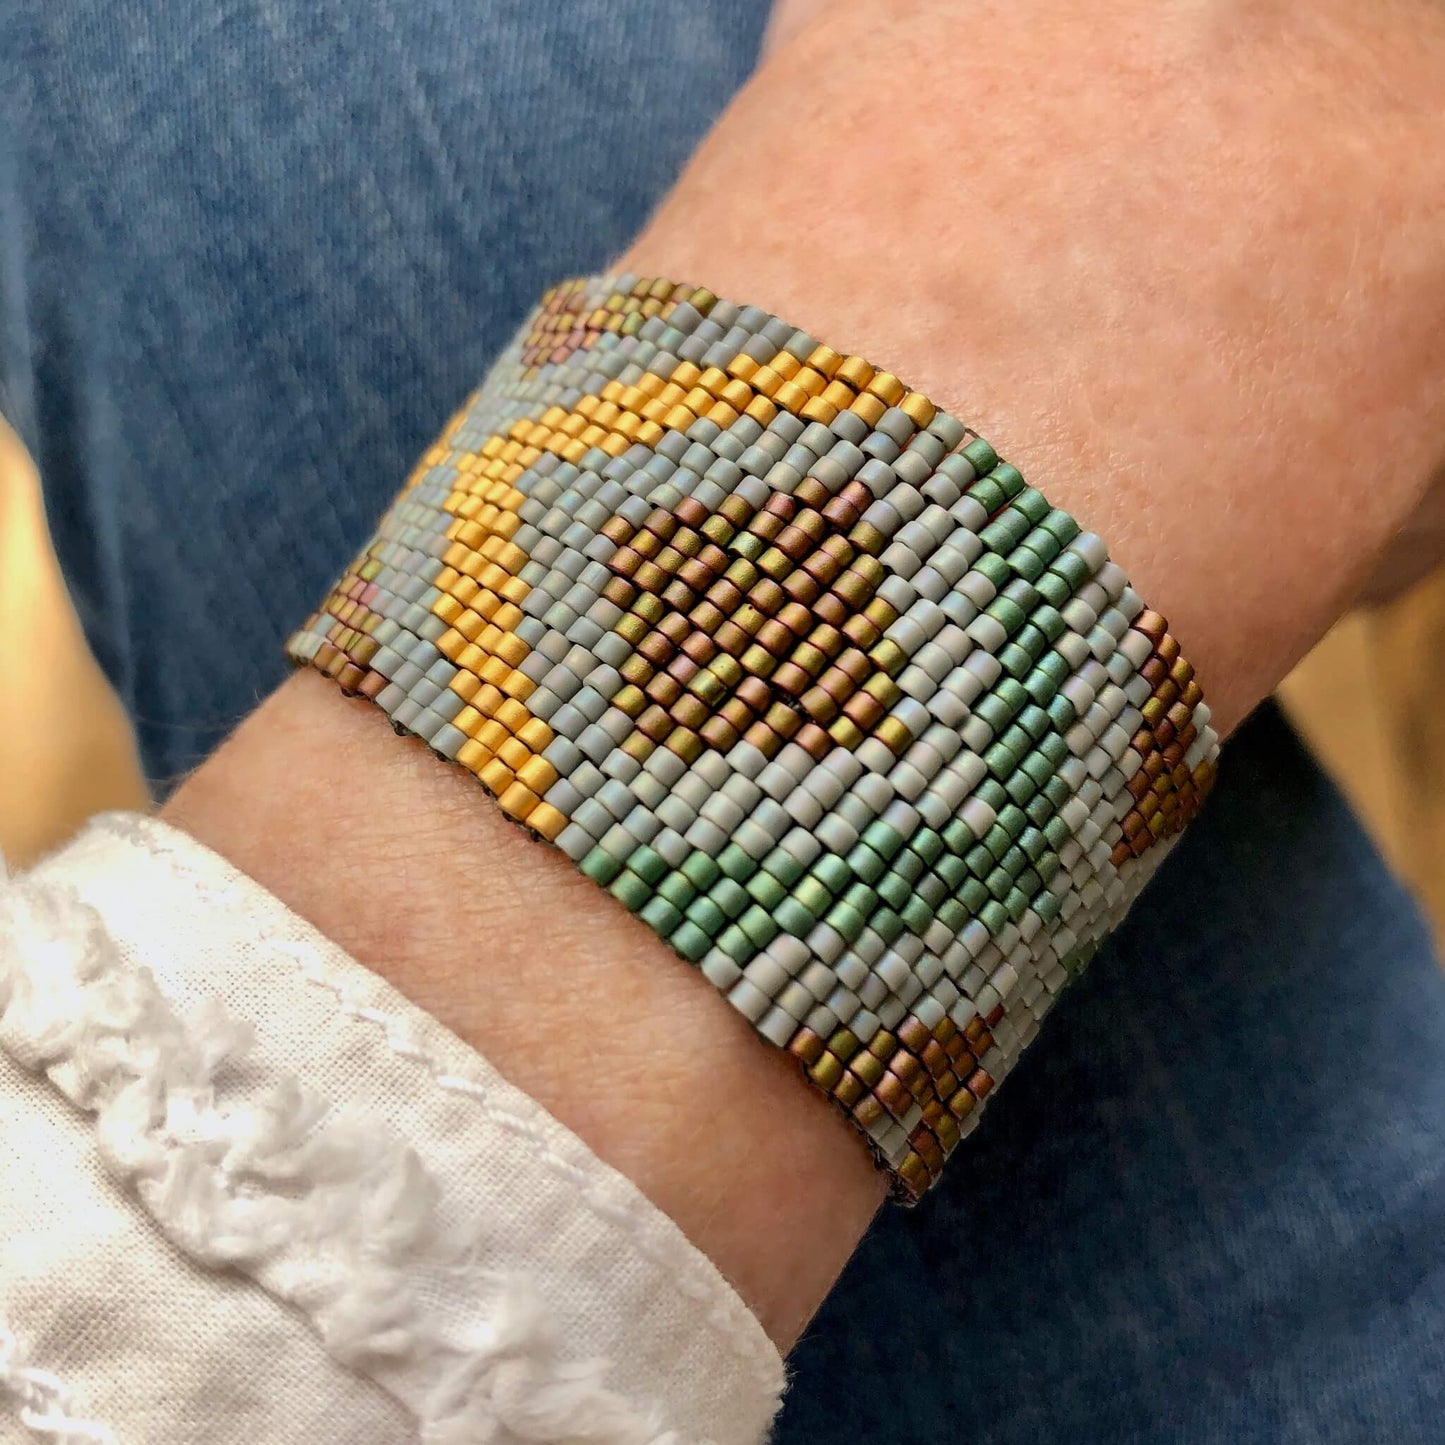 Cuff bracelet with green, grey, and gold seed beads.